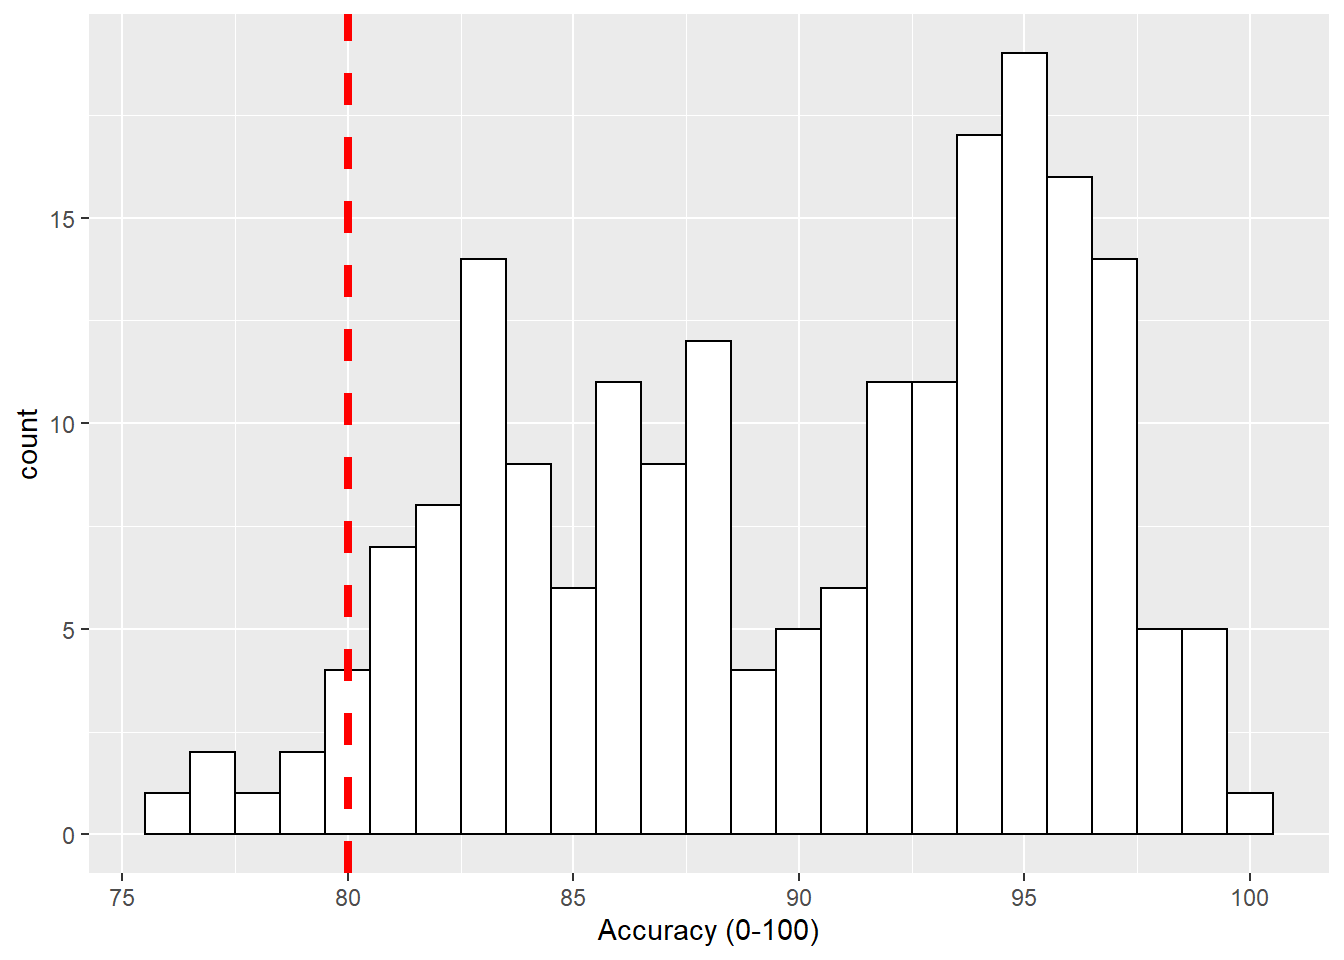 Histogram of accuracy scores with red dashed vertical line indicating 80% accuracy.